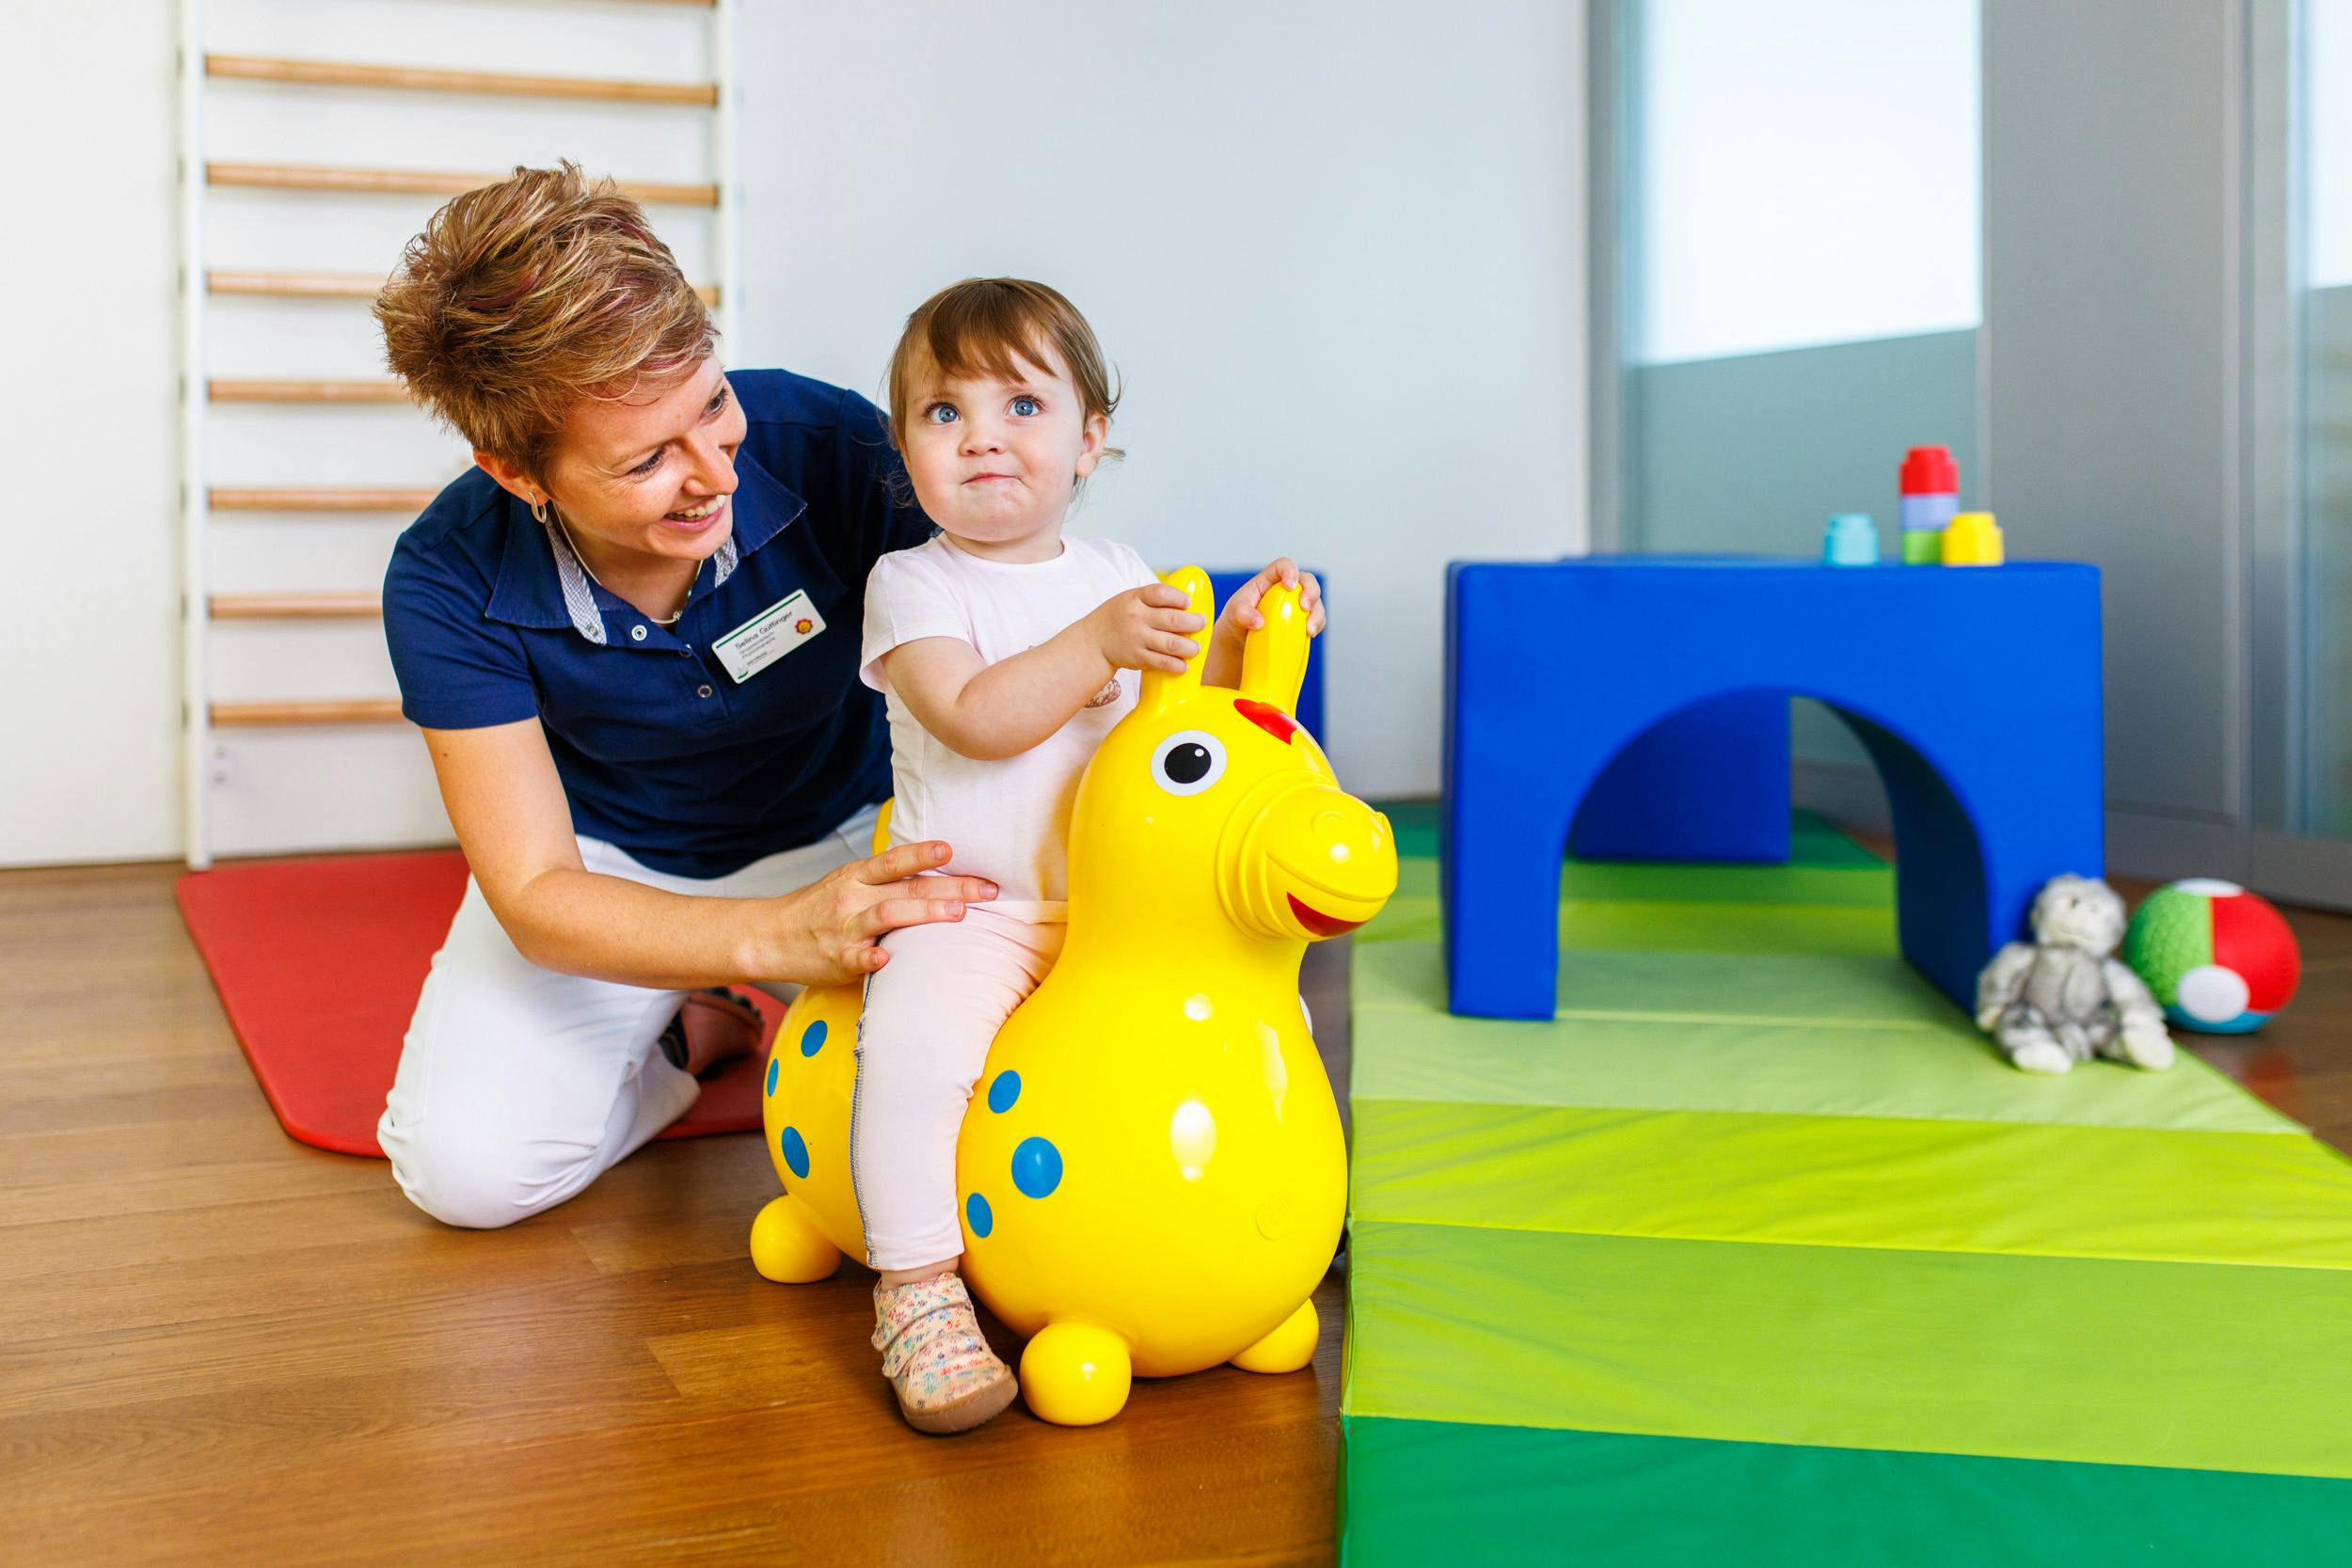 Toddler on a yellow bouncy animal with carer at Kinderphysio Spital Zollikerberg.